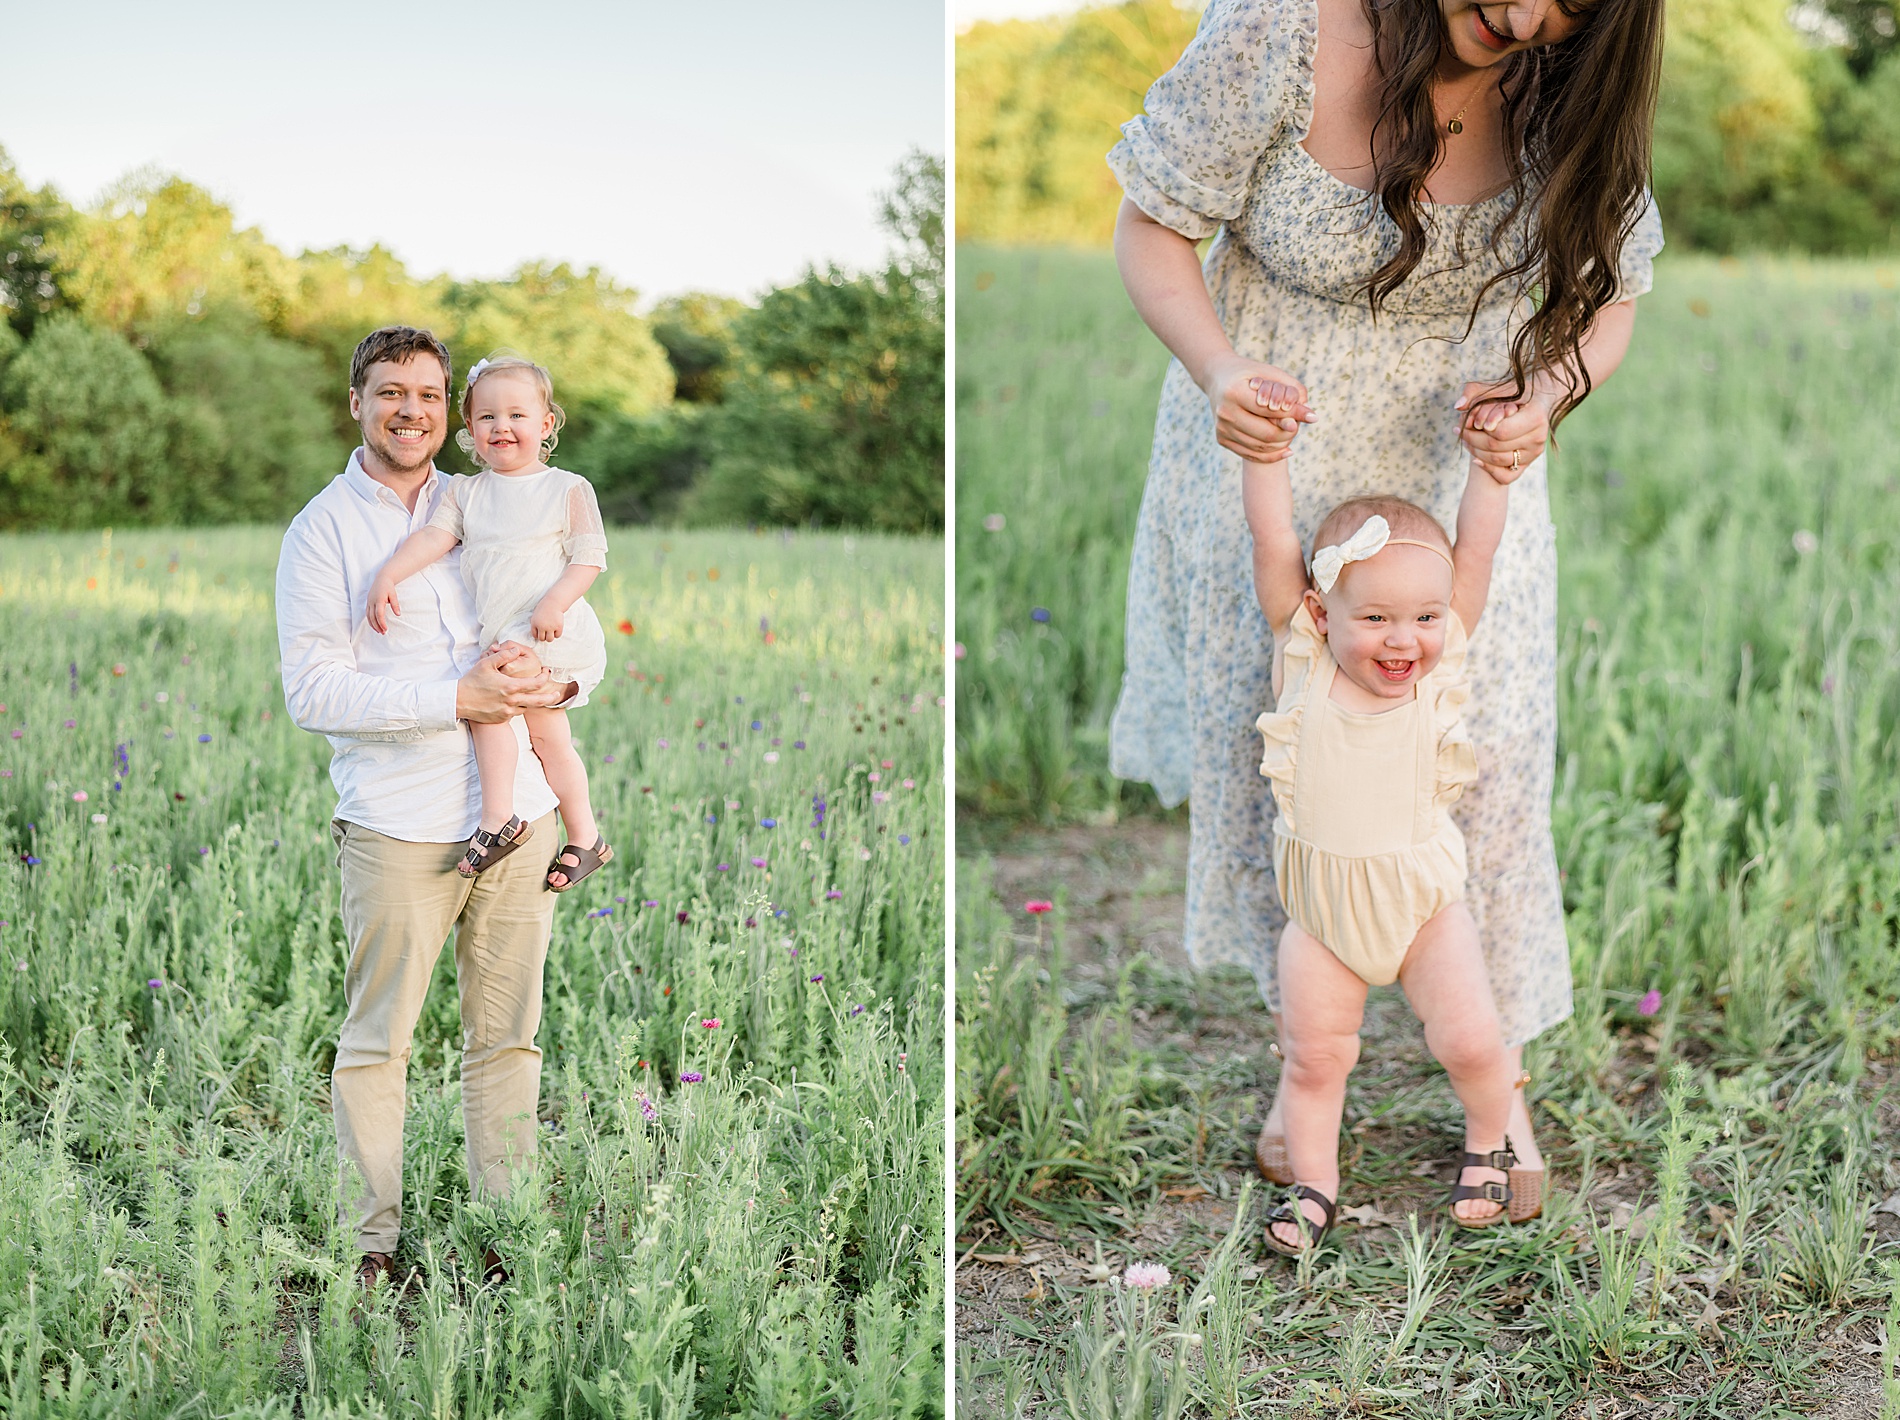 How to choose between a Mini Session vs. Full session by Lindsey Dutton Photography, a Dallas family photographer